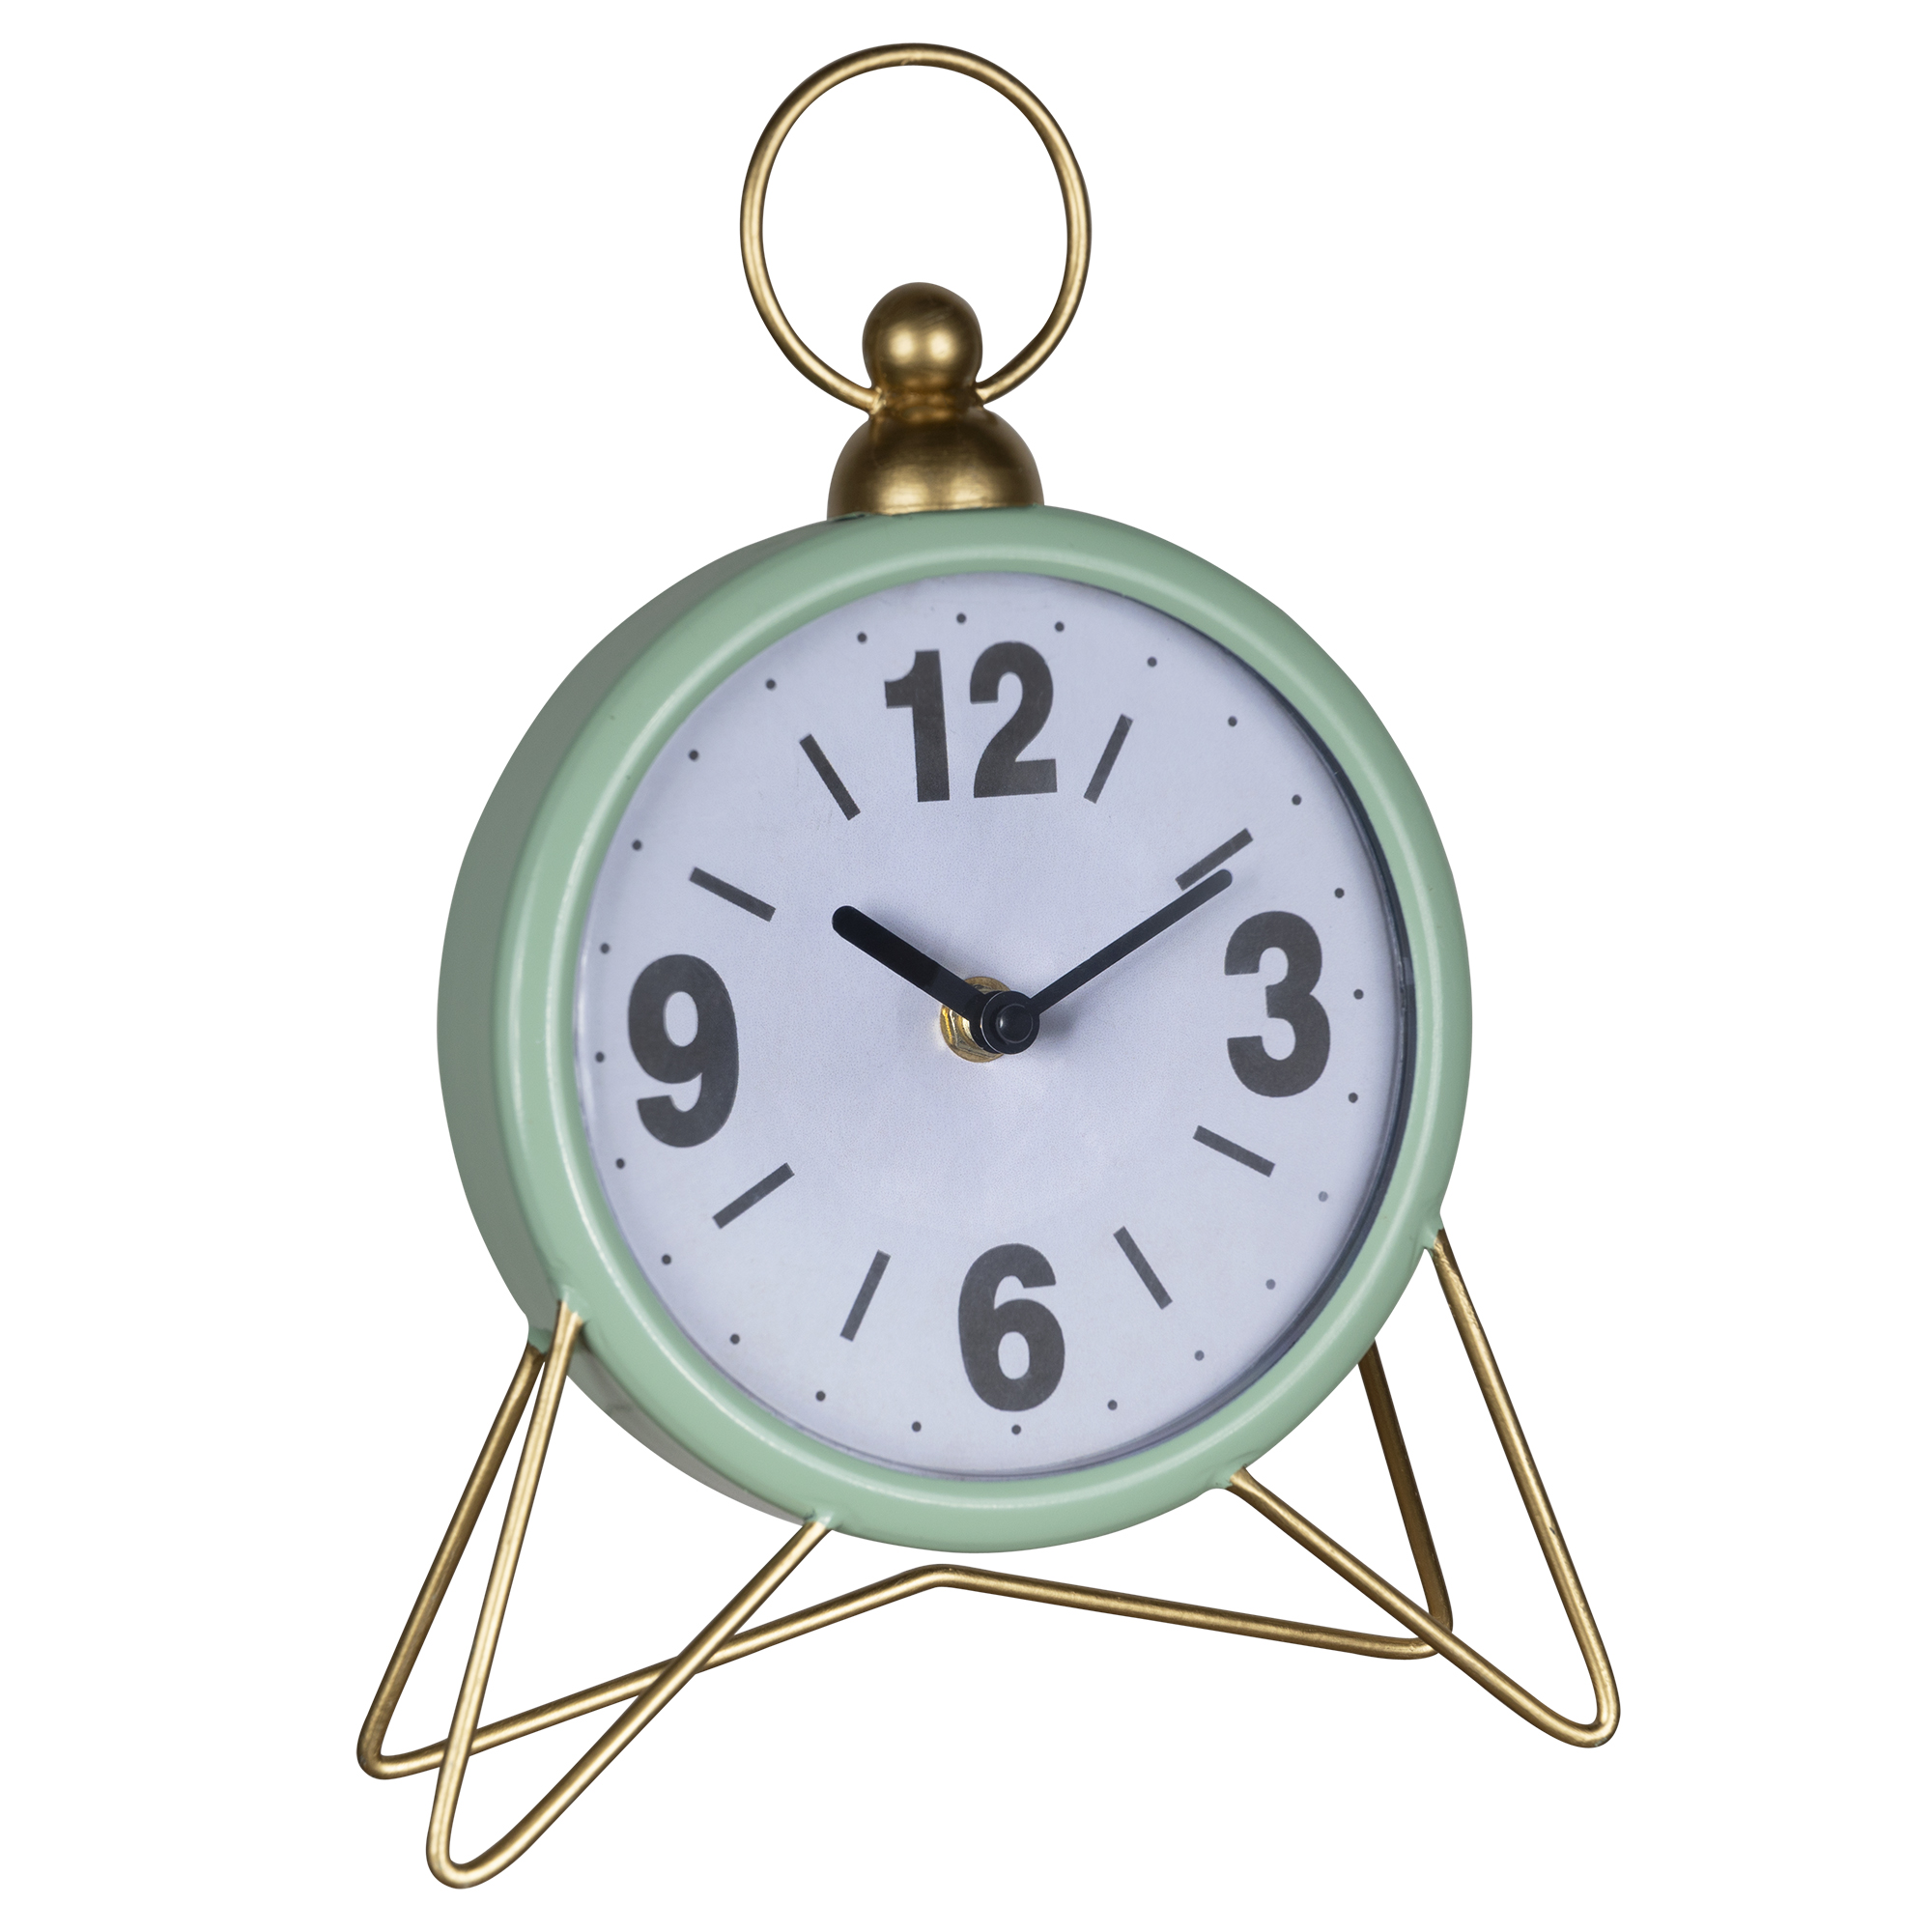 Stratton Home Decor Spencer Table Top Clock